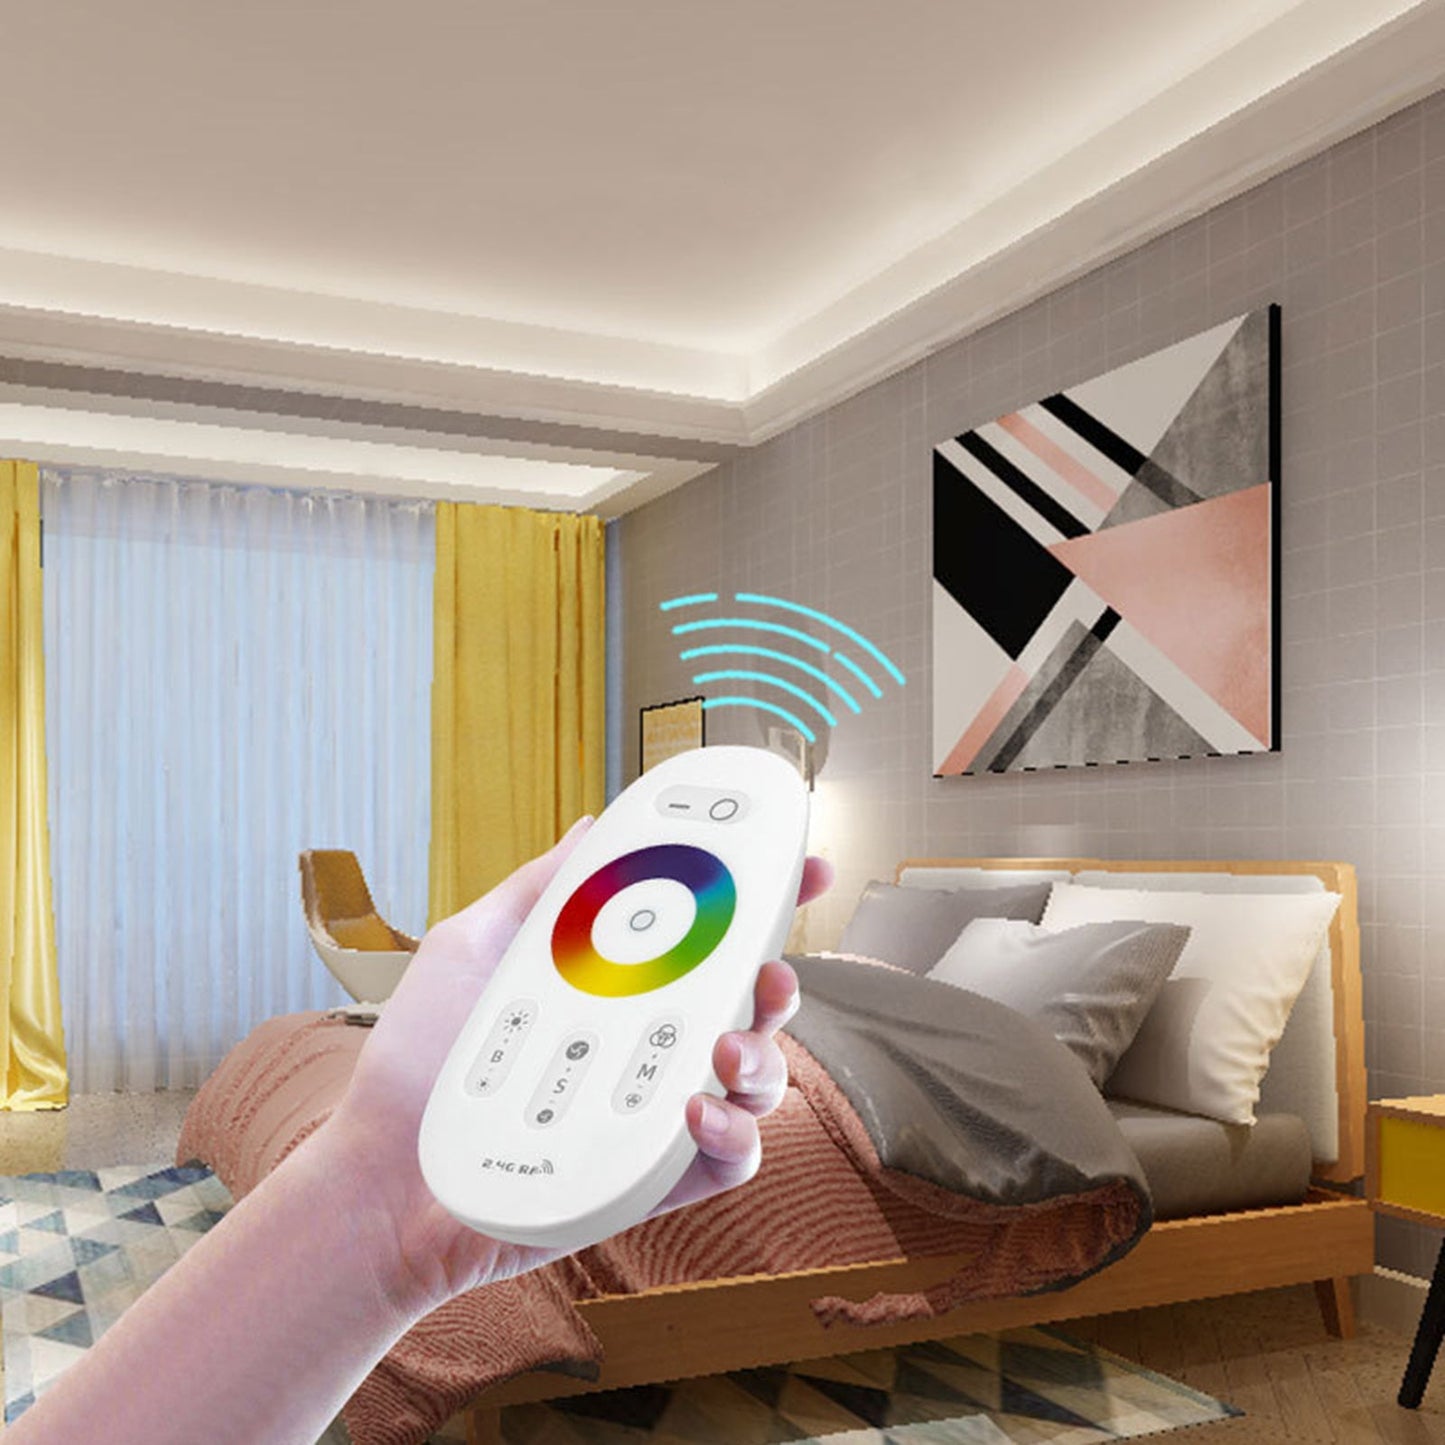 2.4G Touch RF Control Remote Controller For DC 12-24V RGB LED Light Strip